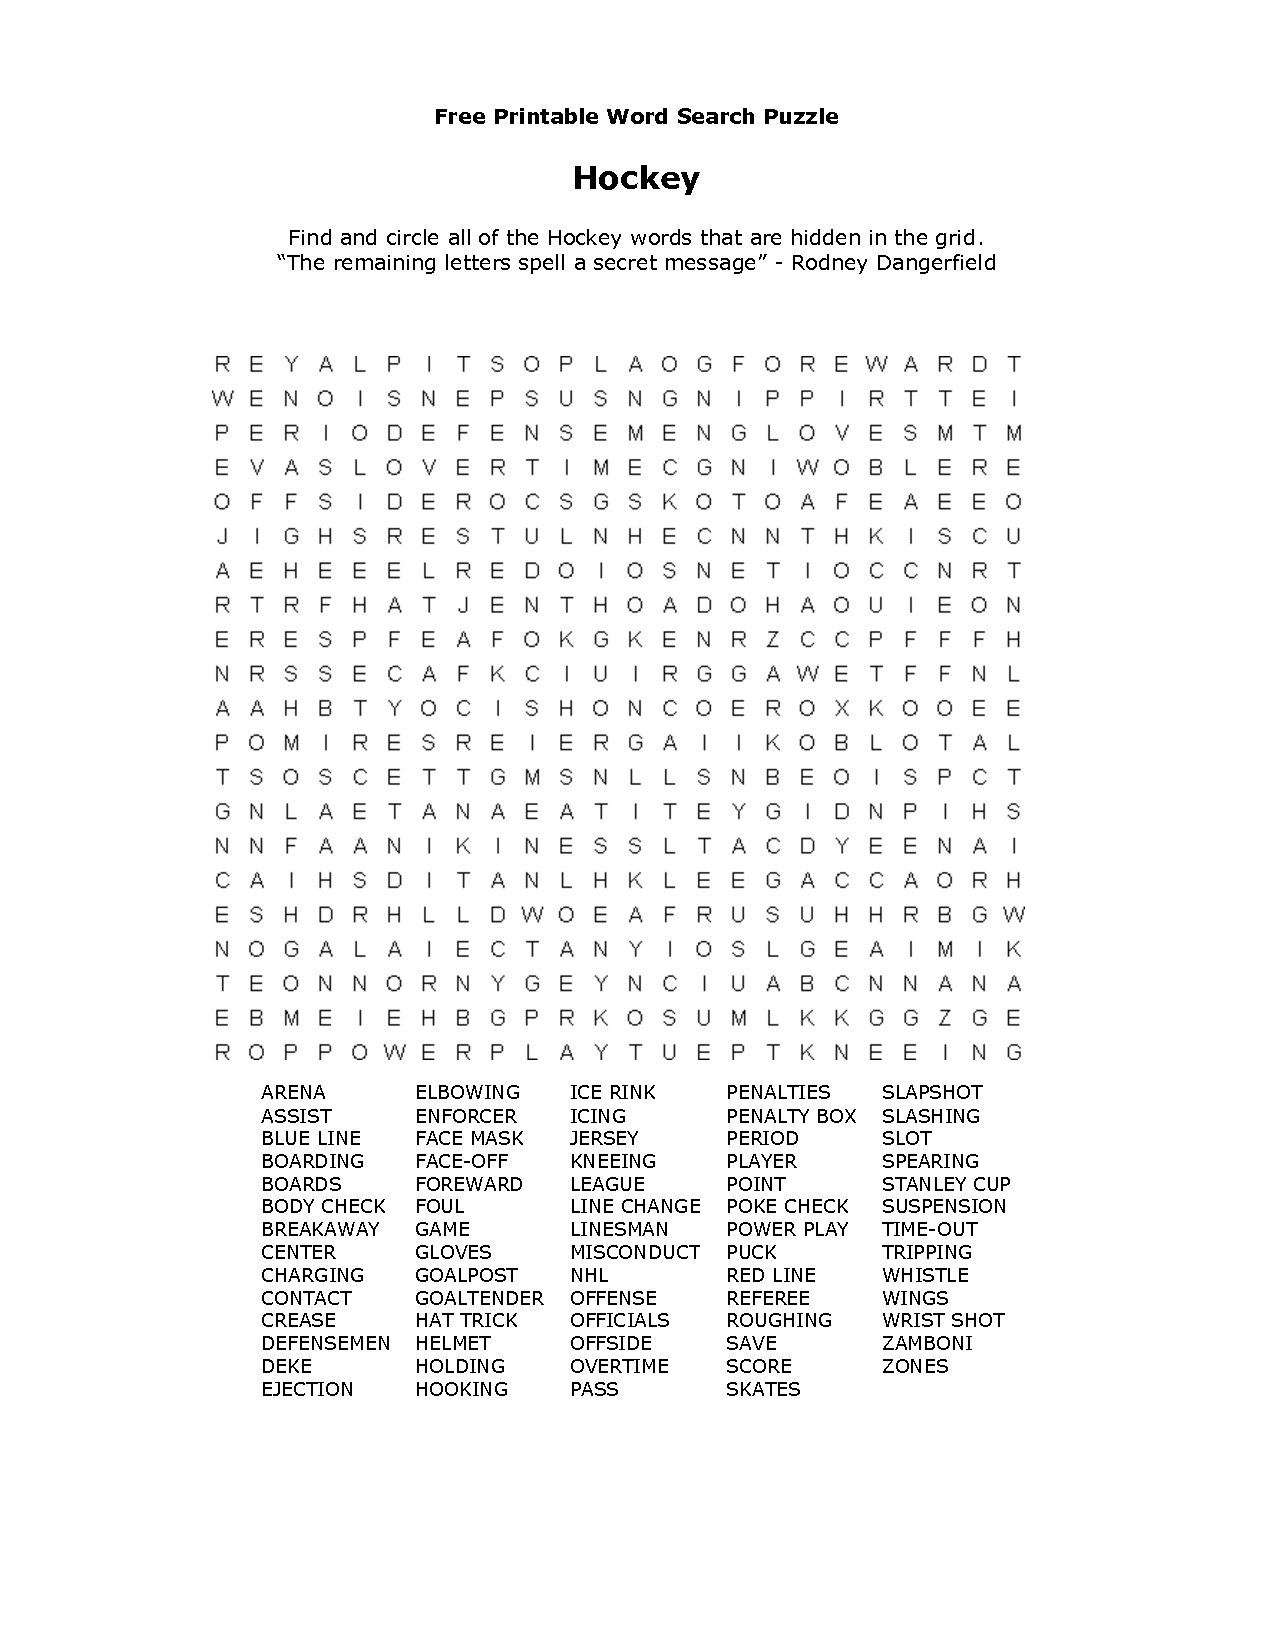 Free Printable Word Searches | طلال | Free Printable Word Searches - Free Printable Word Search Puzzles